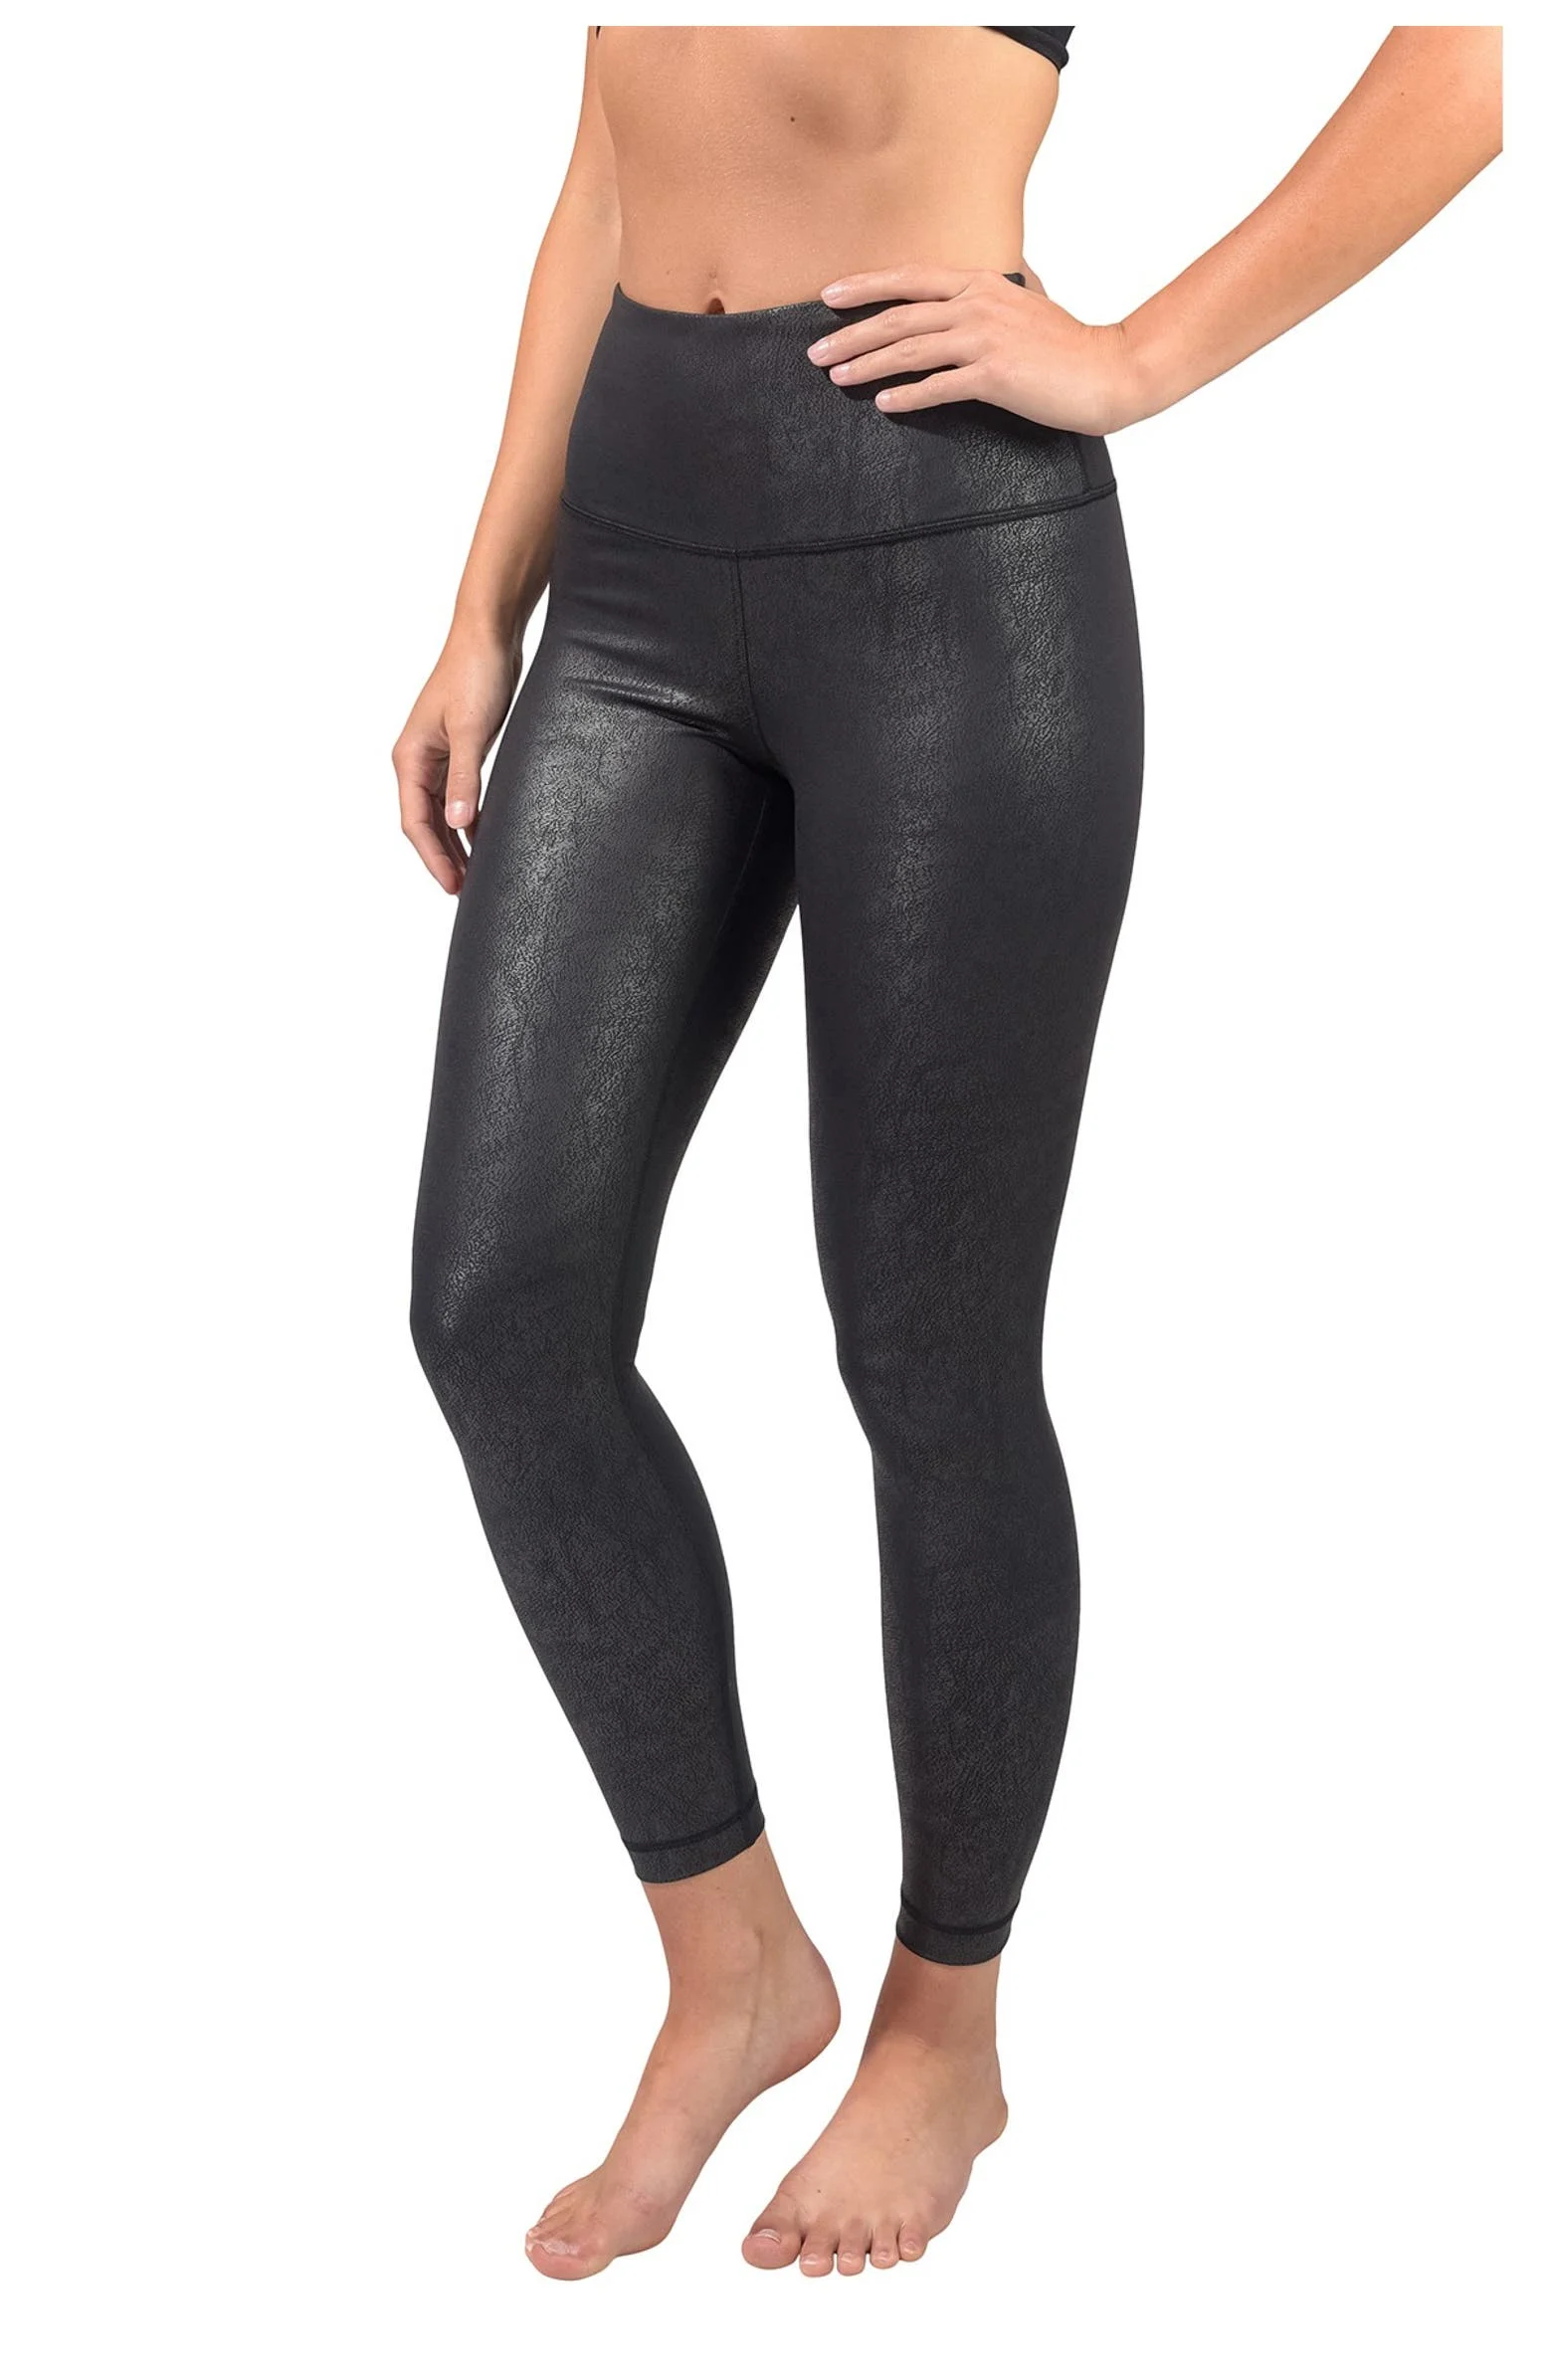 90 DEGREE BY REFLEX Faux Cracked Leather High Rise Ankle Leggings